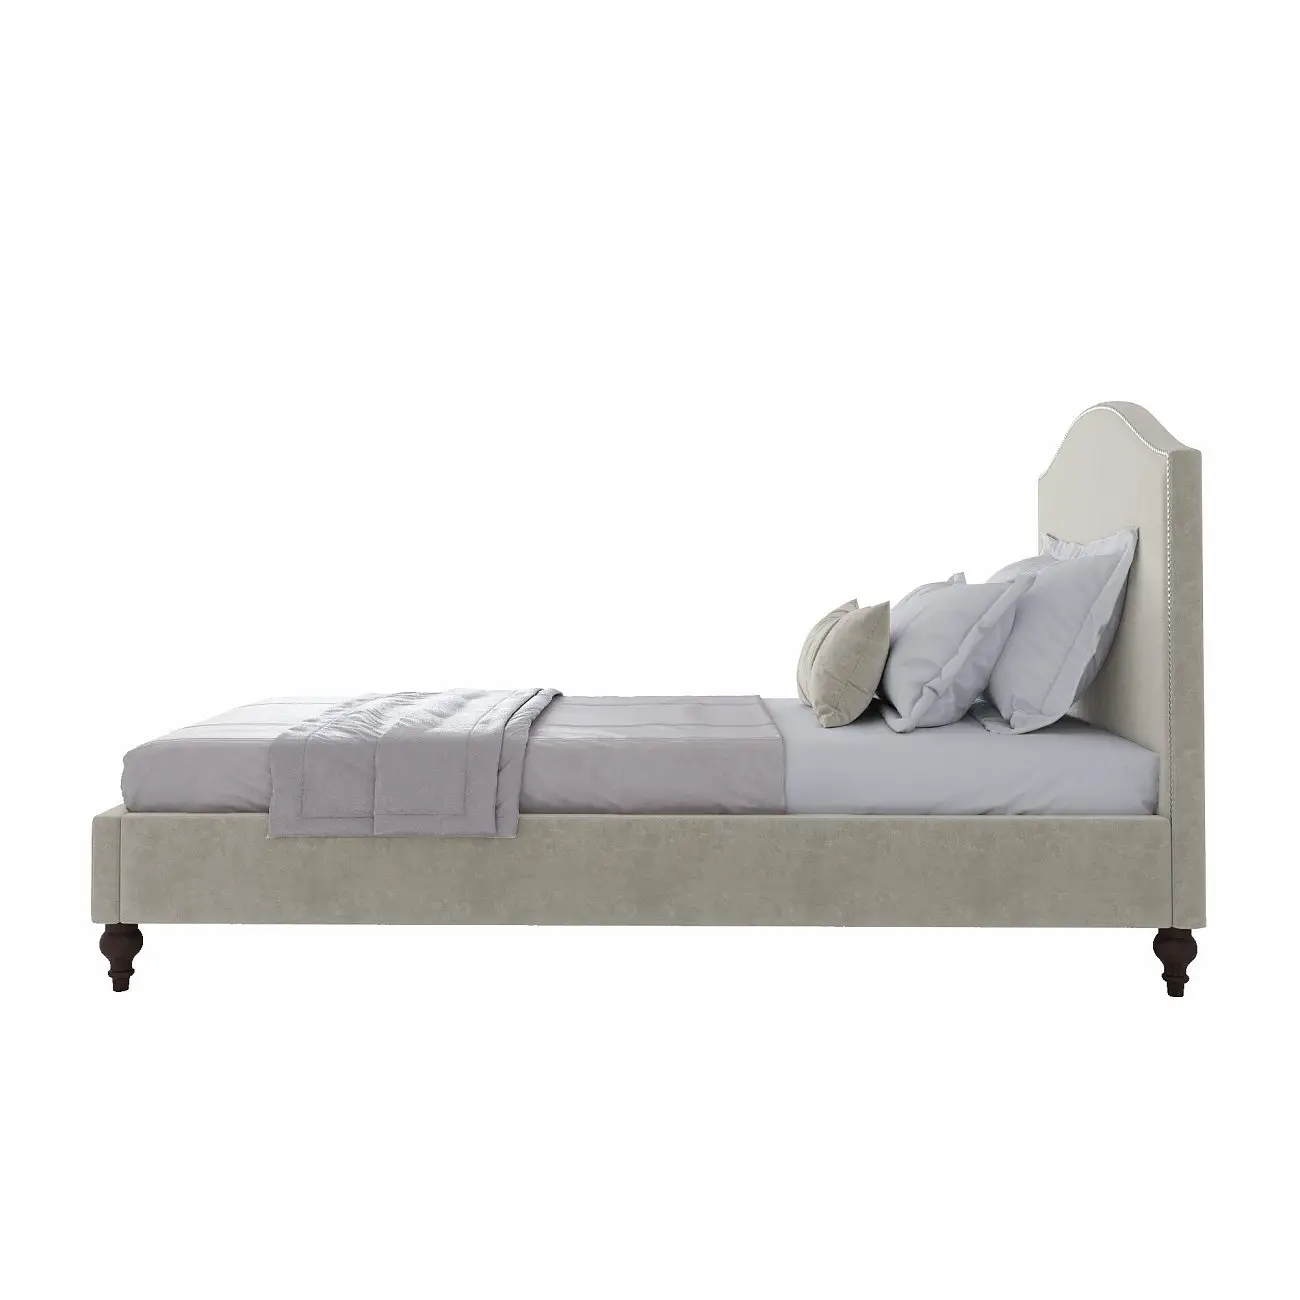 Single bed with upholstered headboard 90x200 cm beige Fleurie